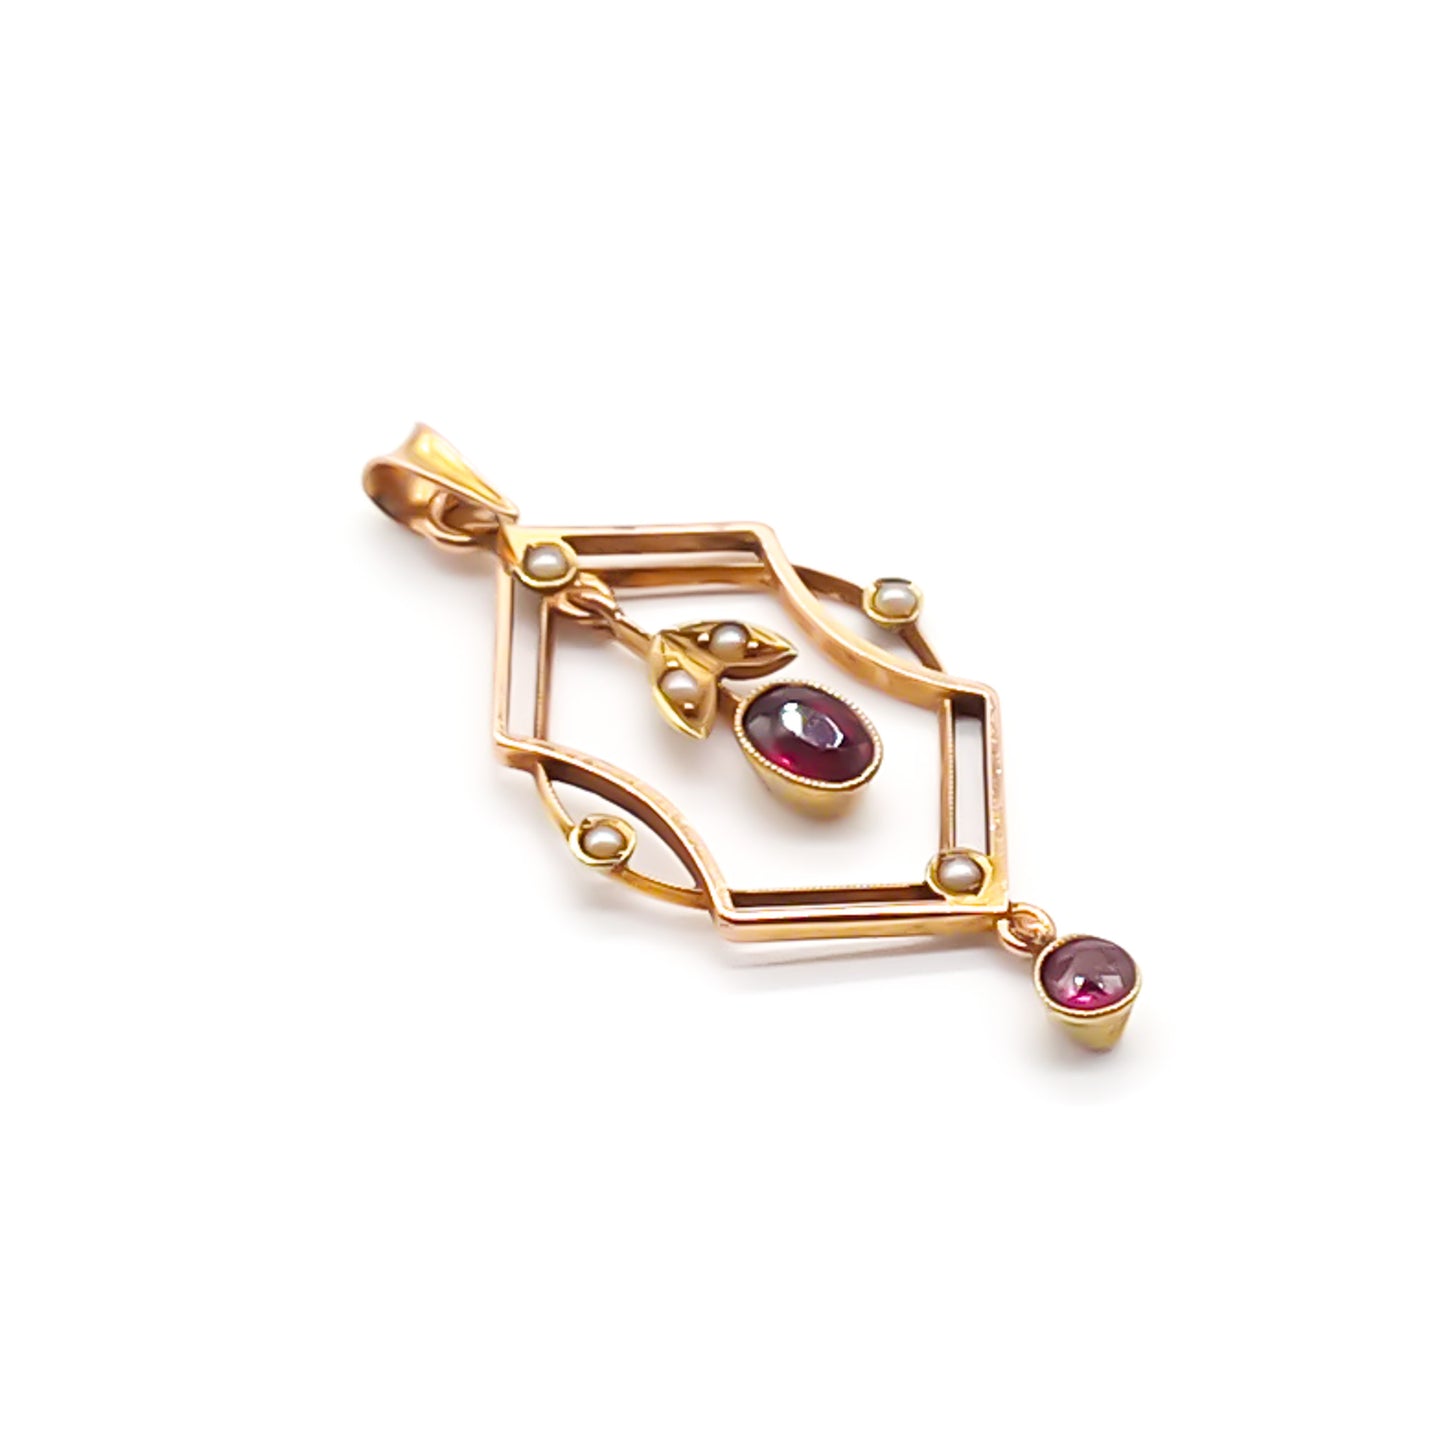 Dainty Edwardian 9ct rose gold pendant set with six seed pearls and two faceted garnet drops.